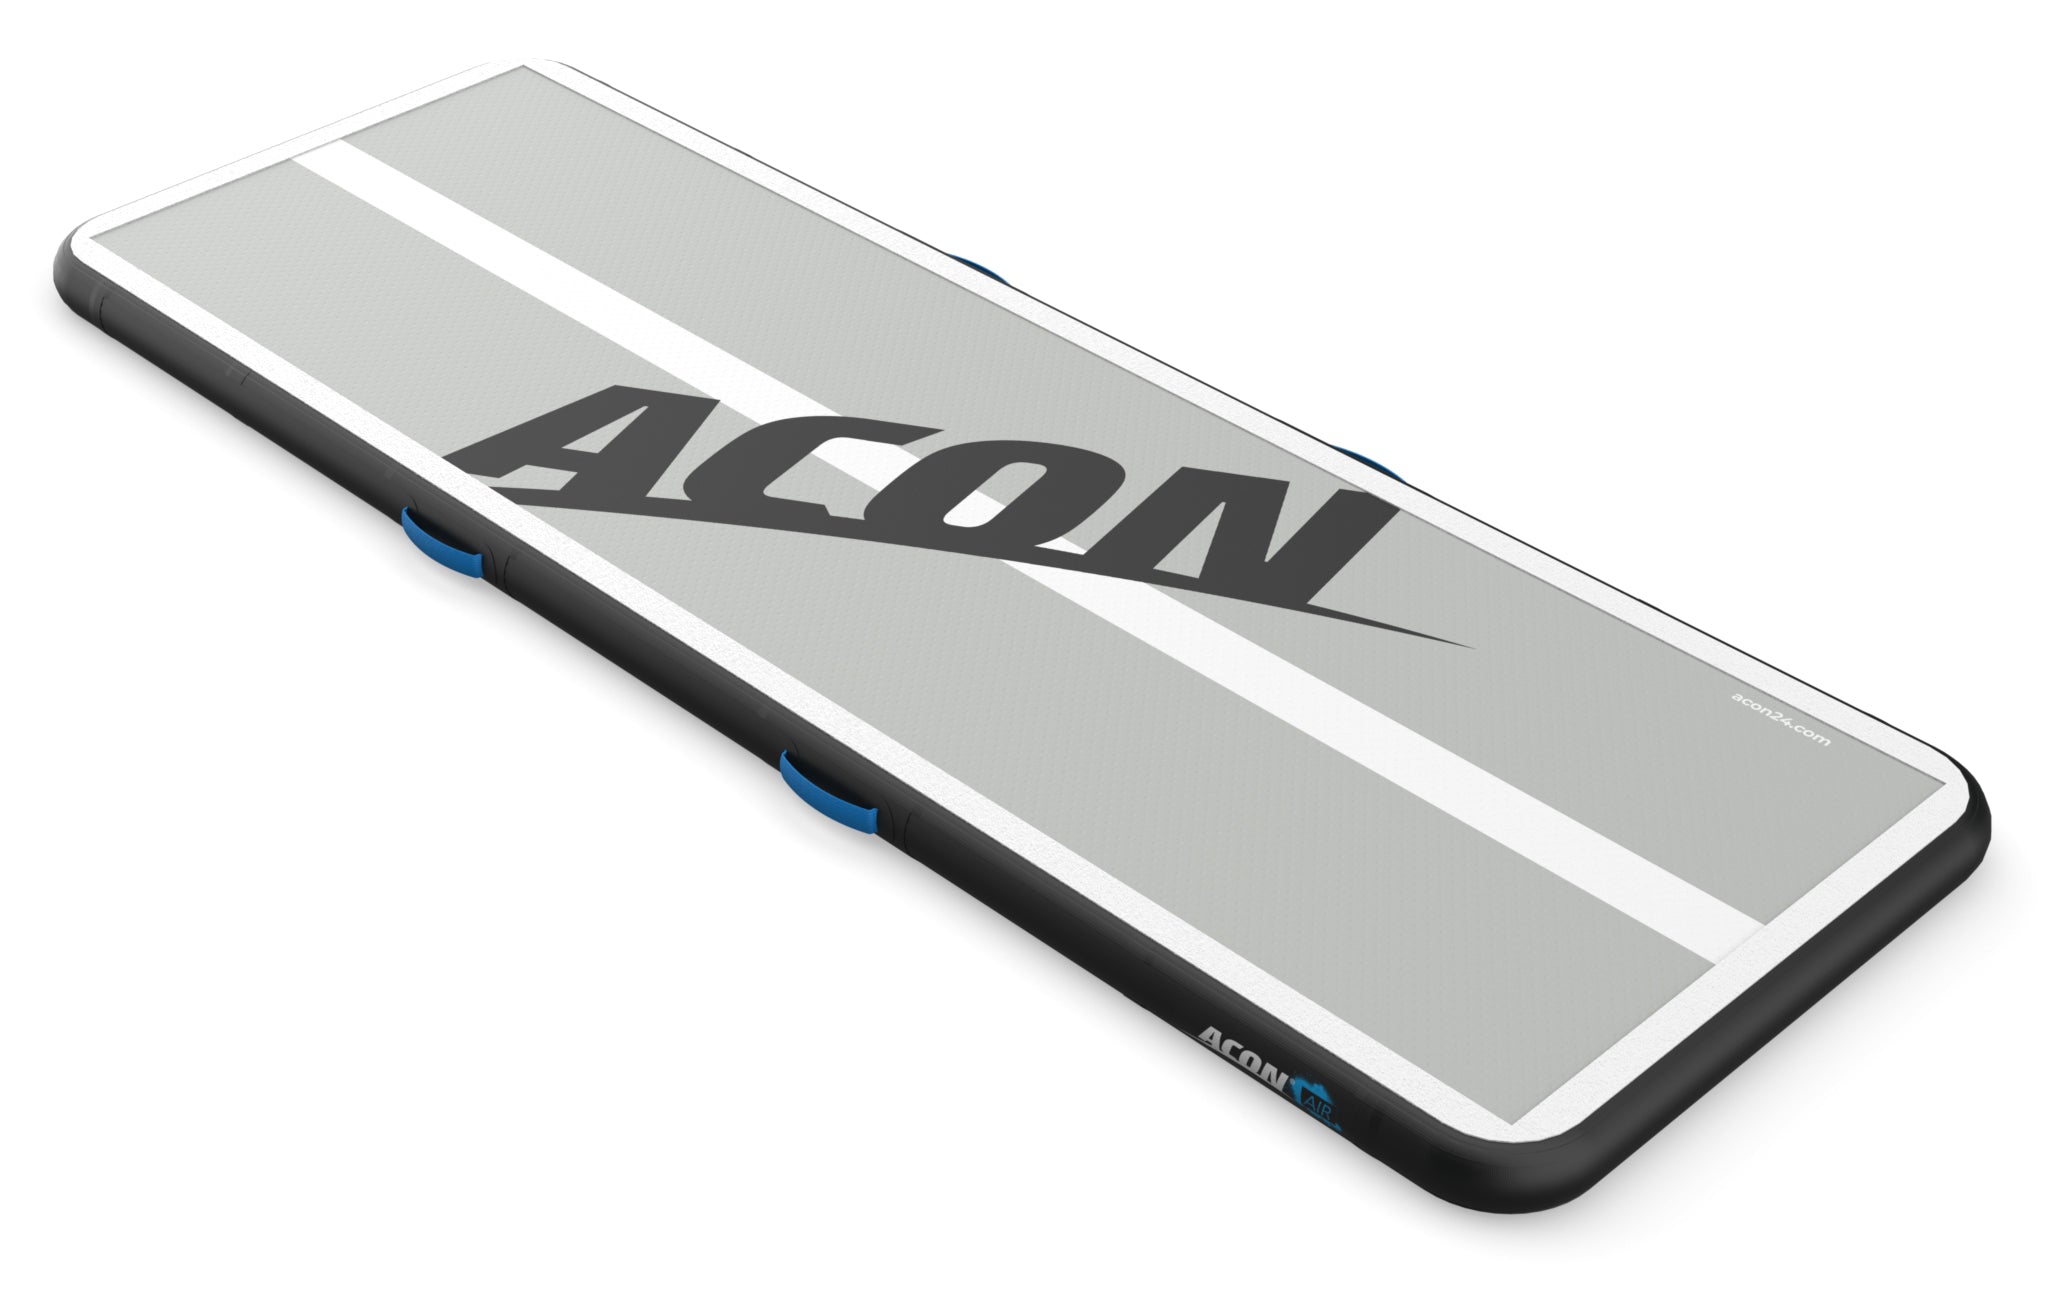 A 3m Airtrack by ACON in black, grey and white color